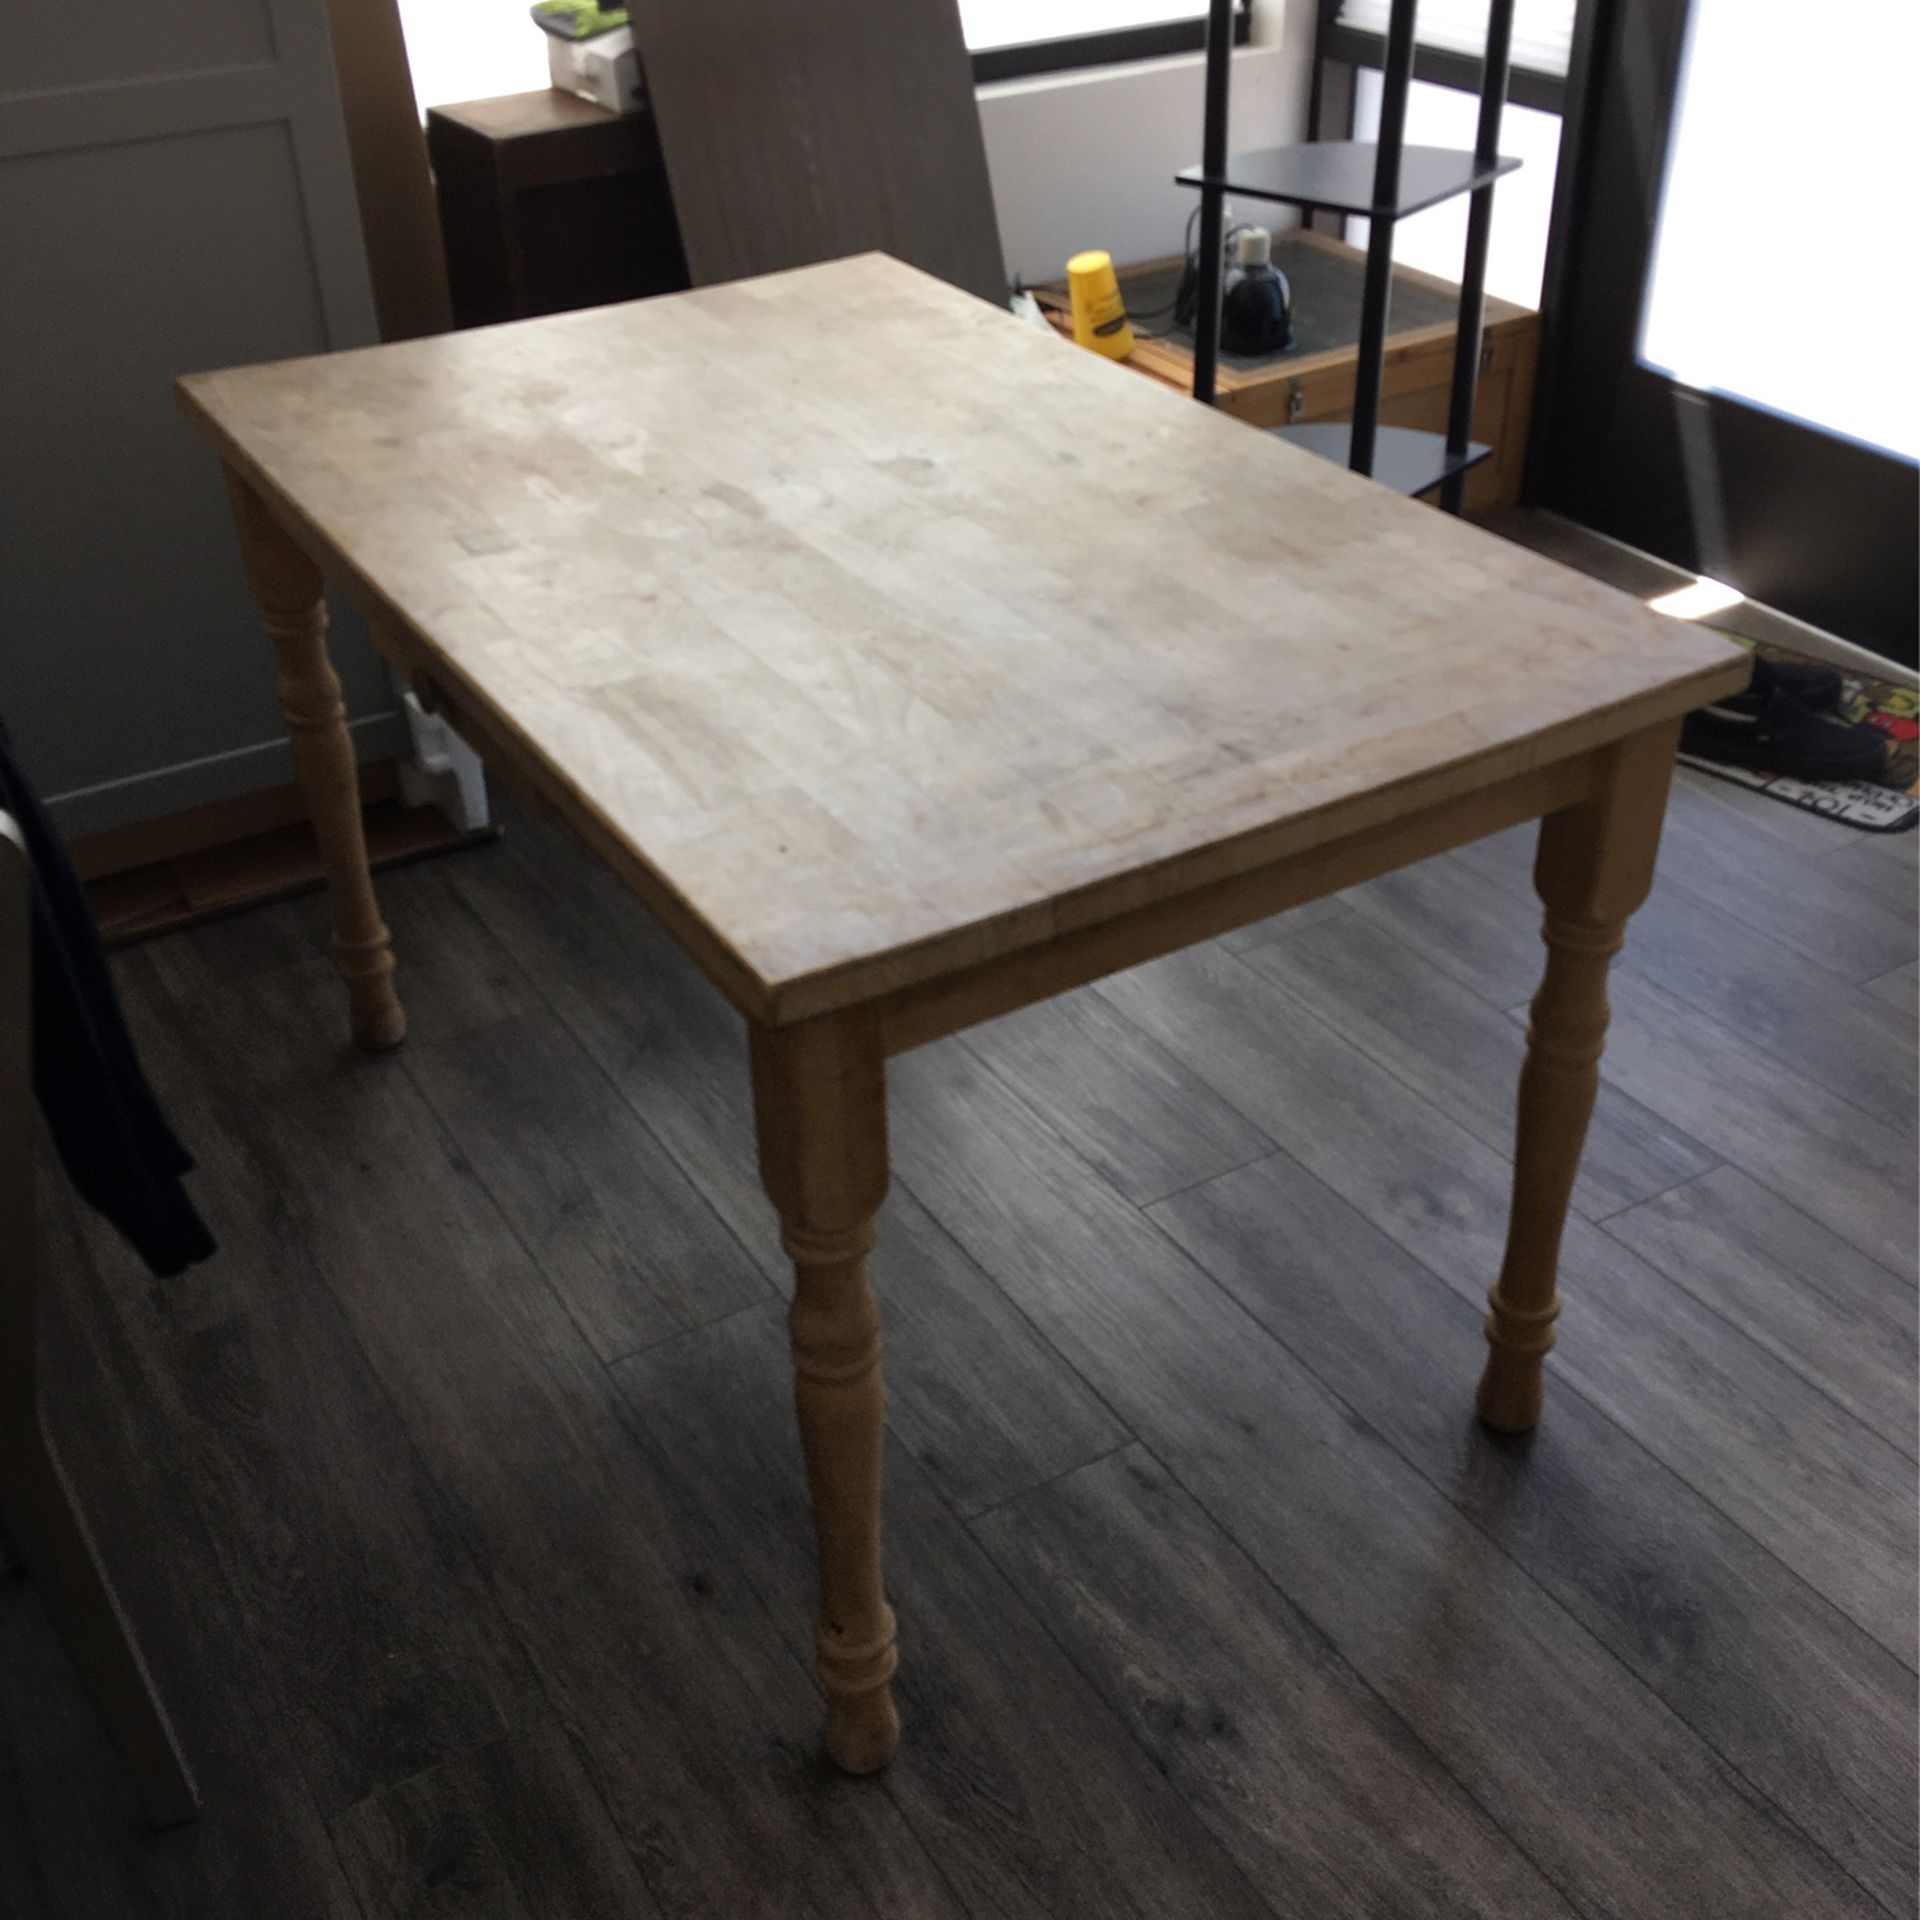 Have This Wood Table 5$!